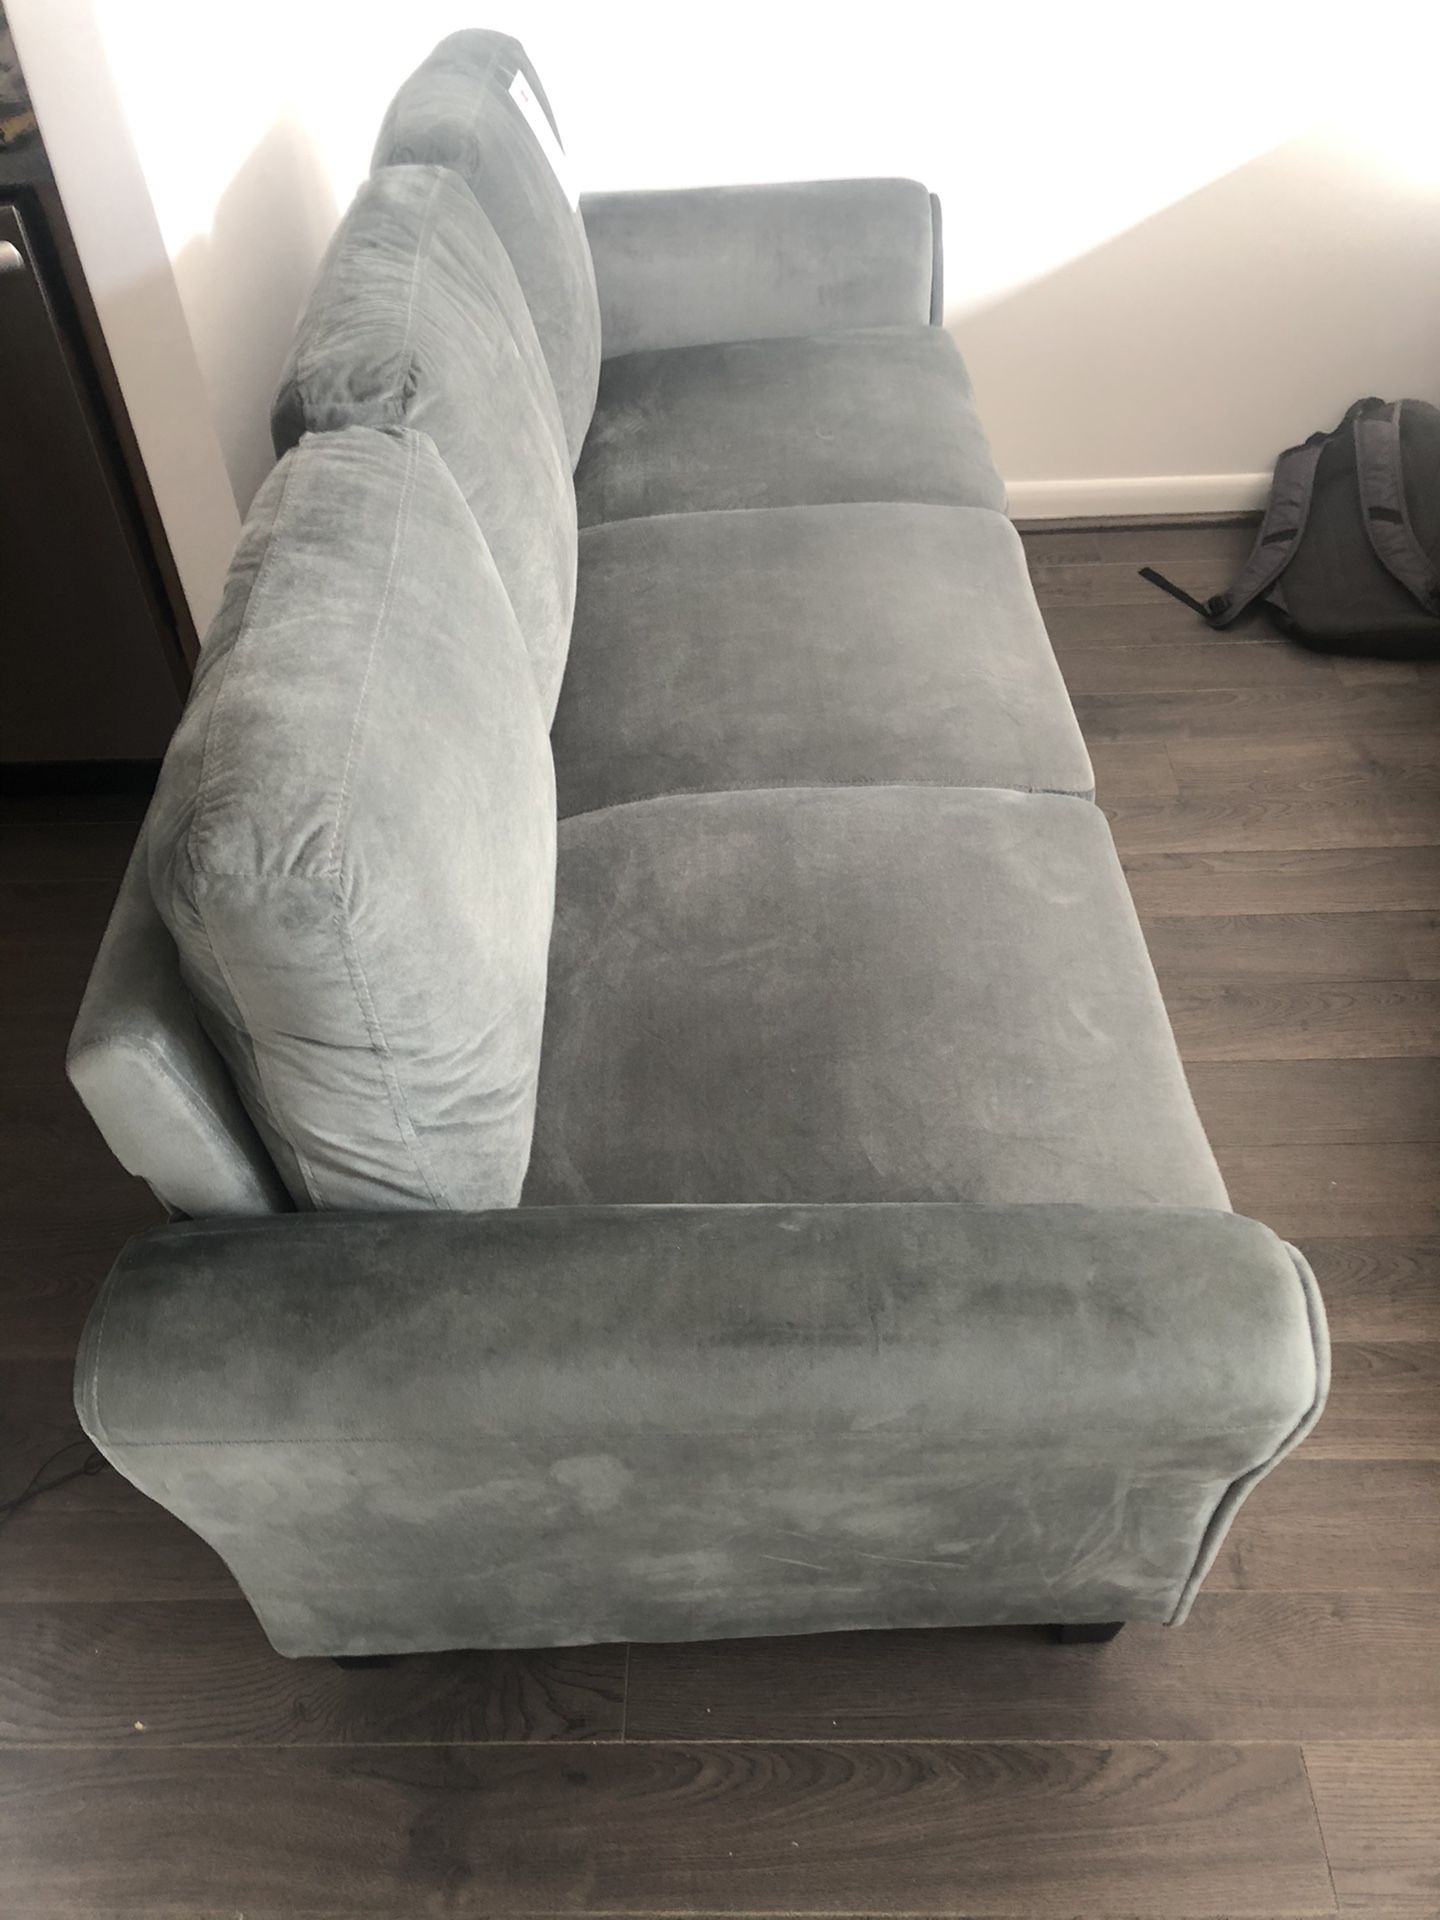 Brand New Couch with Tags- Small defect (see photo) price reduction